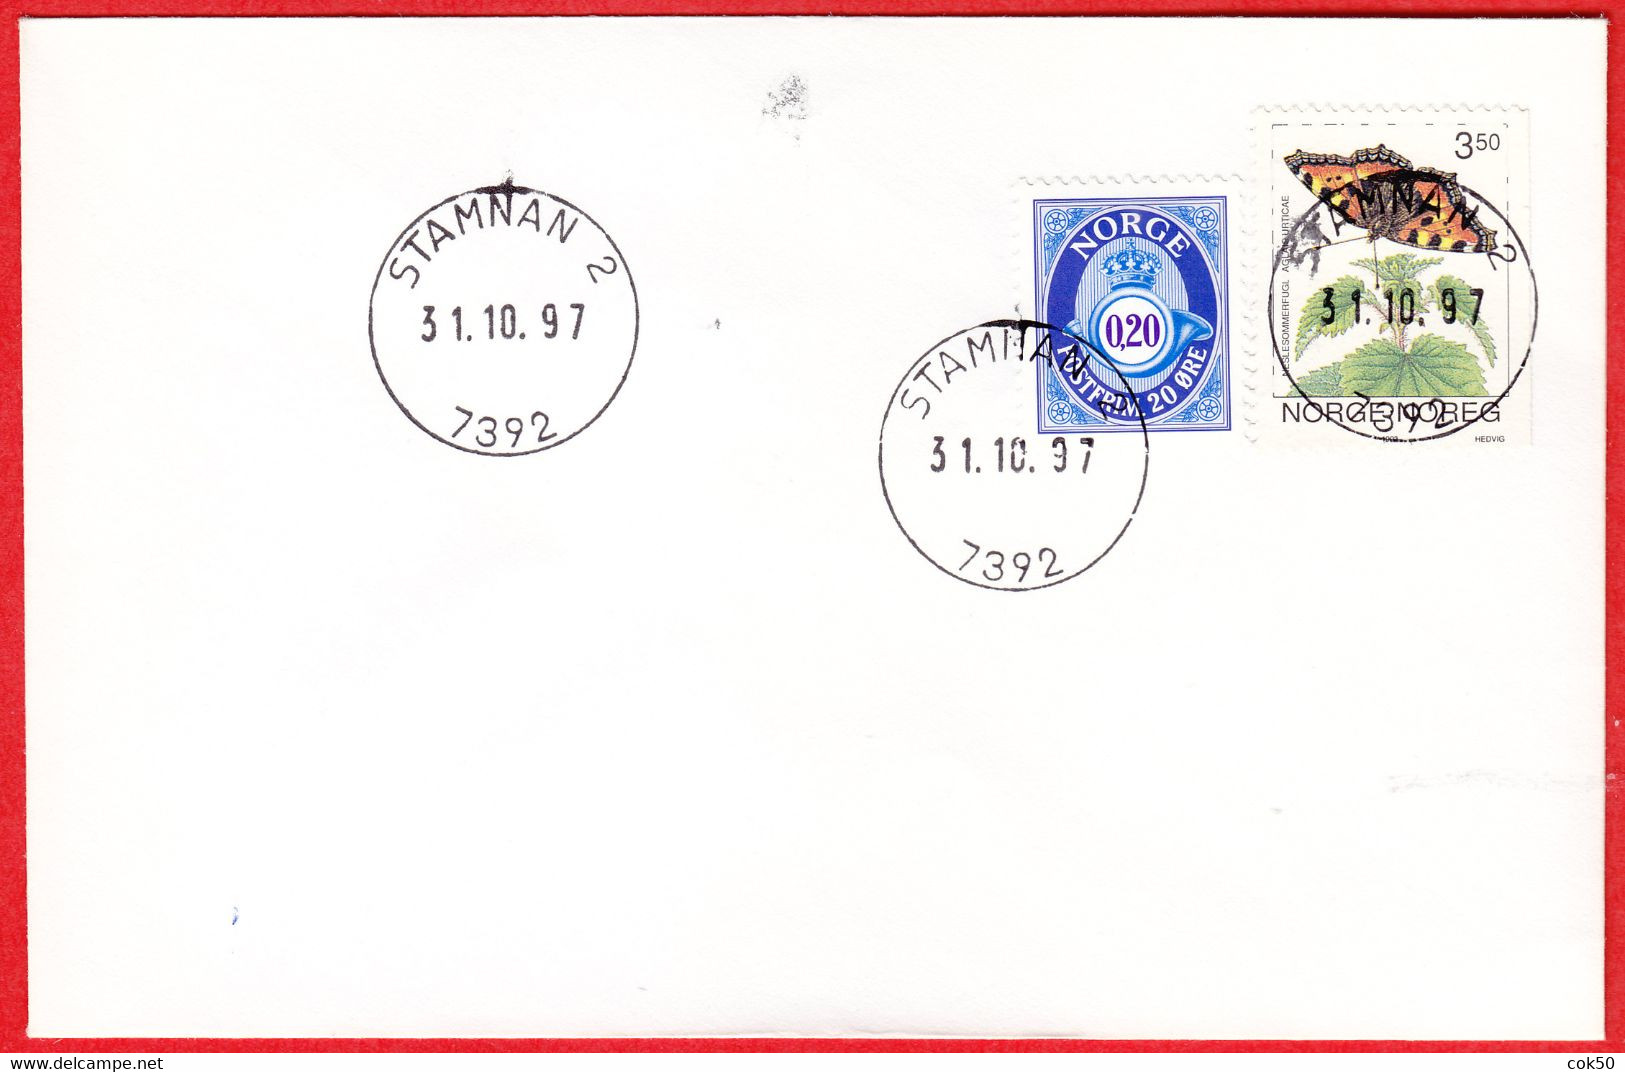 NORWAY -  7392 STAMNAN 2 (Trøndelag County) - Last Day/postoffice Closed On 1997.10.31 - Local Post Stamps